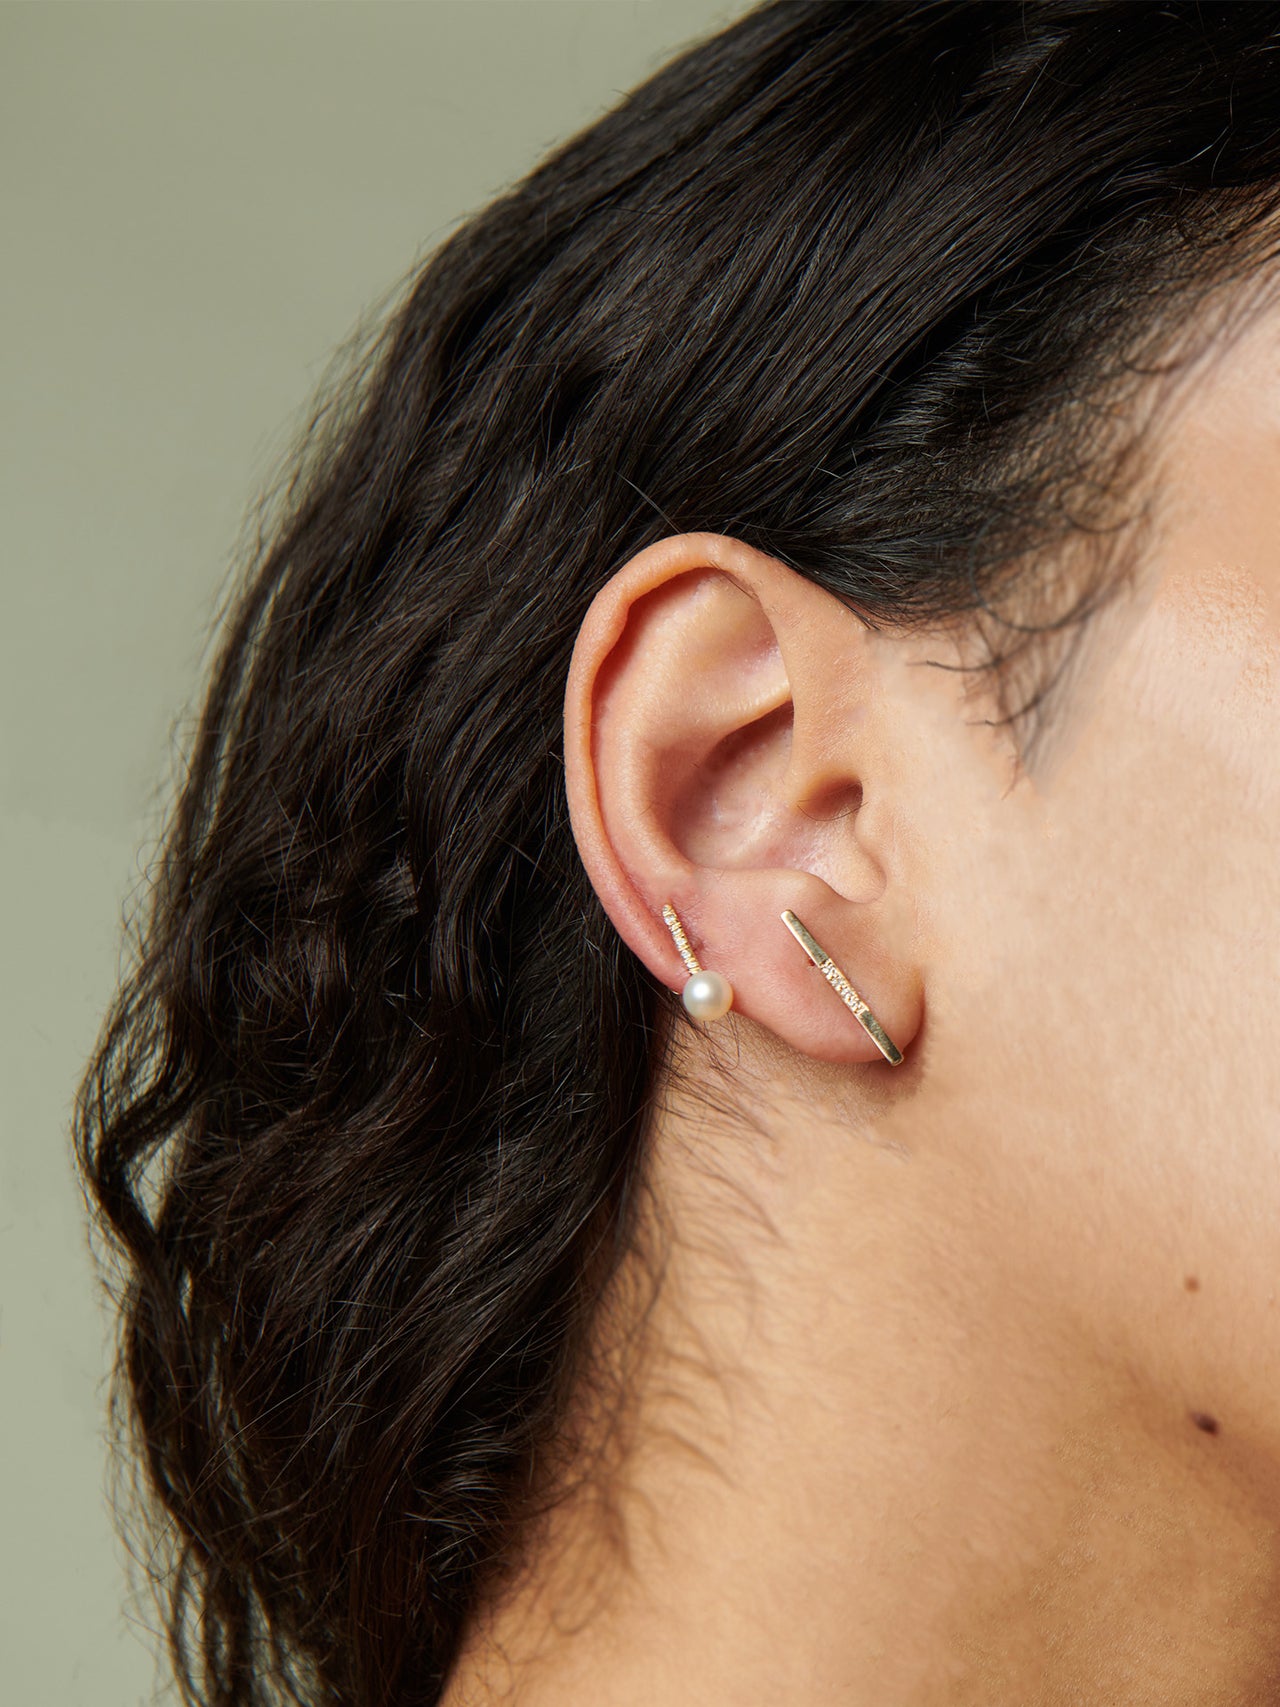 14kt Yellow Gold Diamond Rod Stud Earring pictured on model.